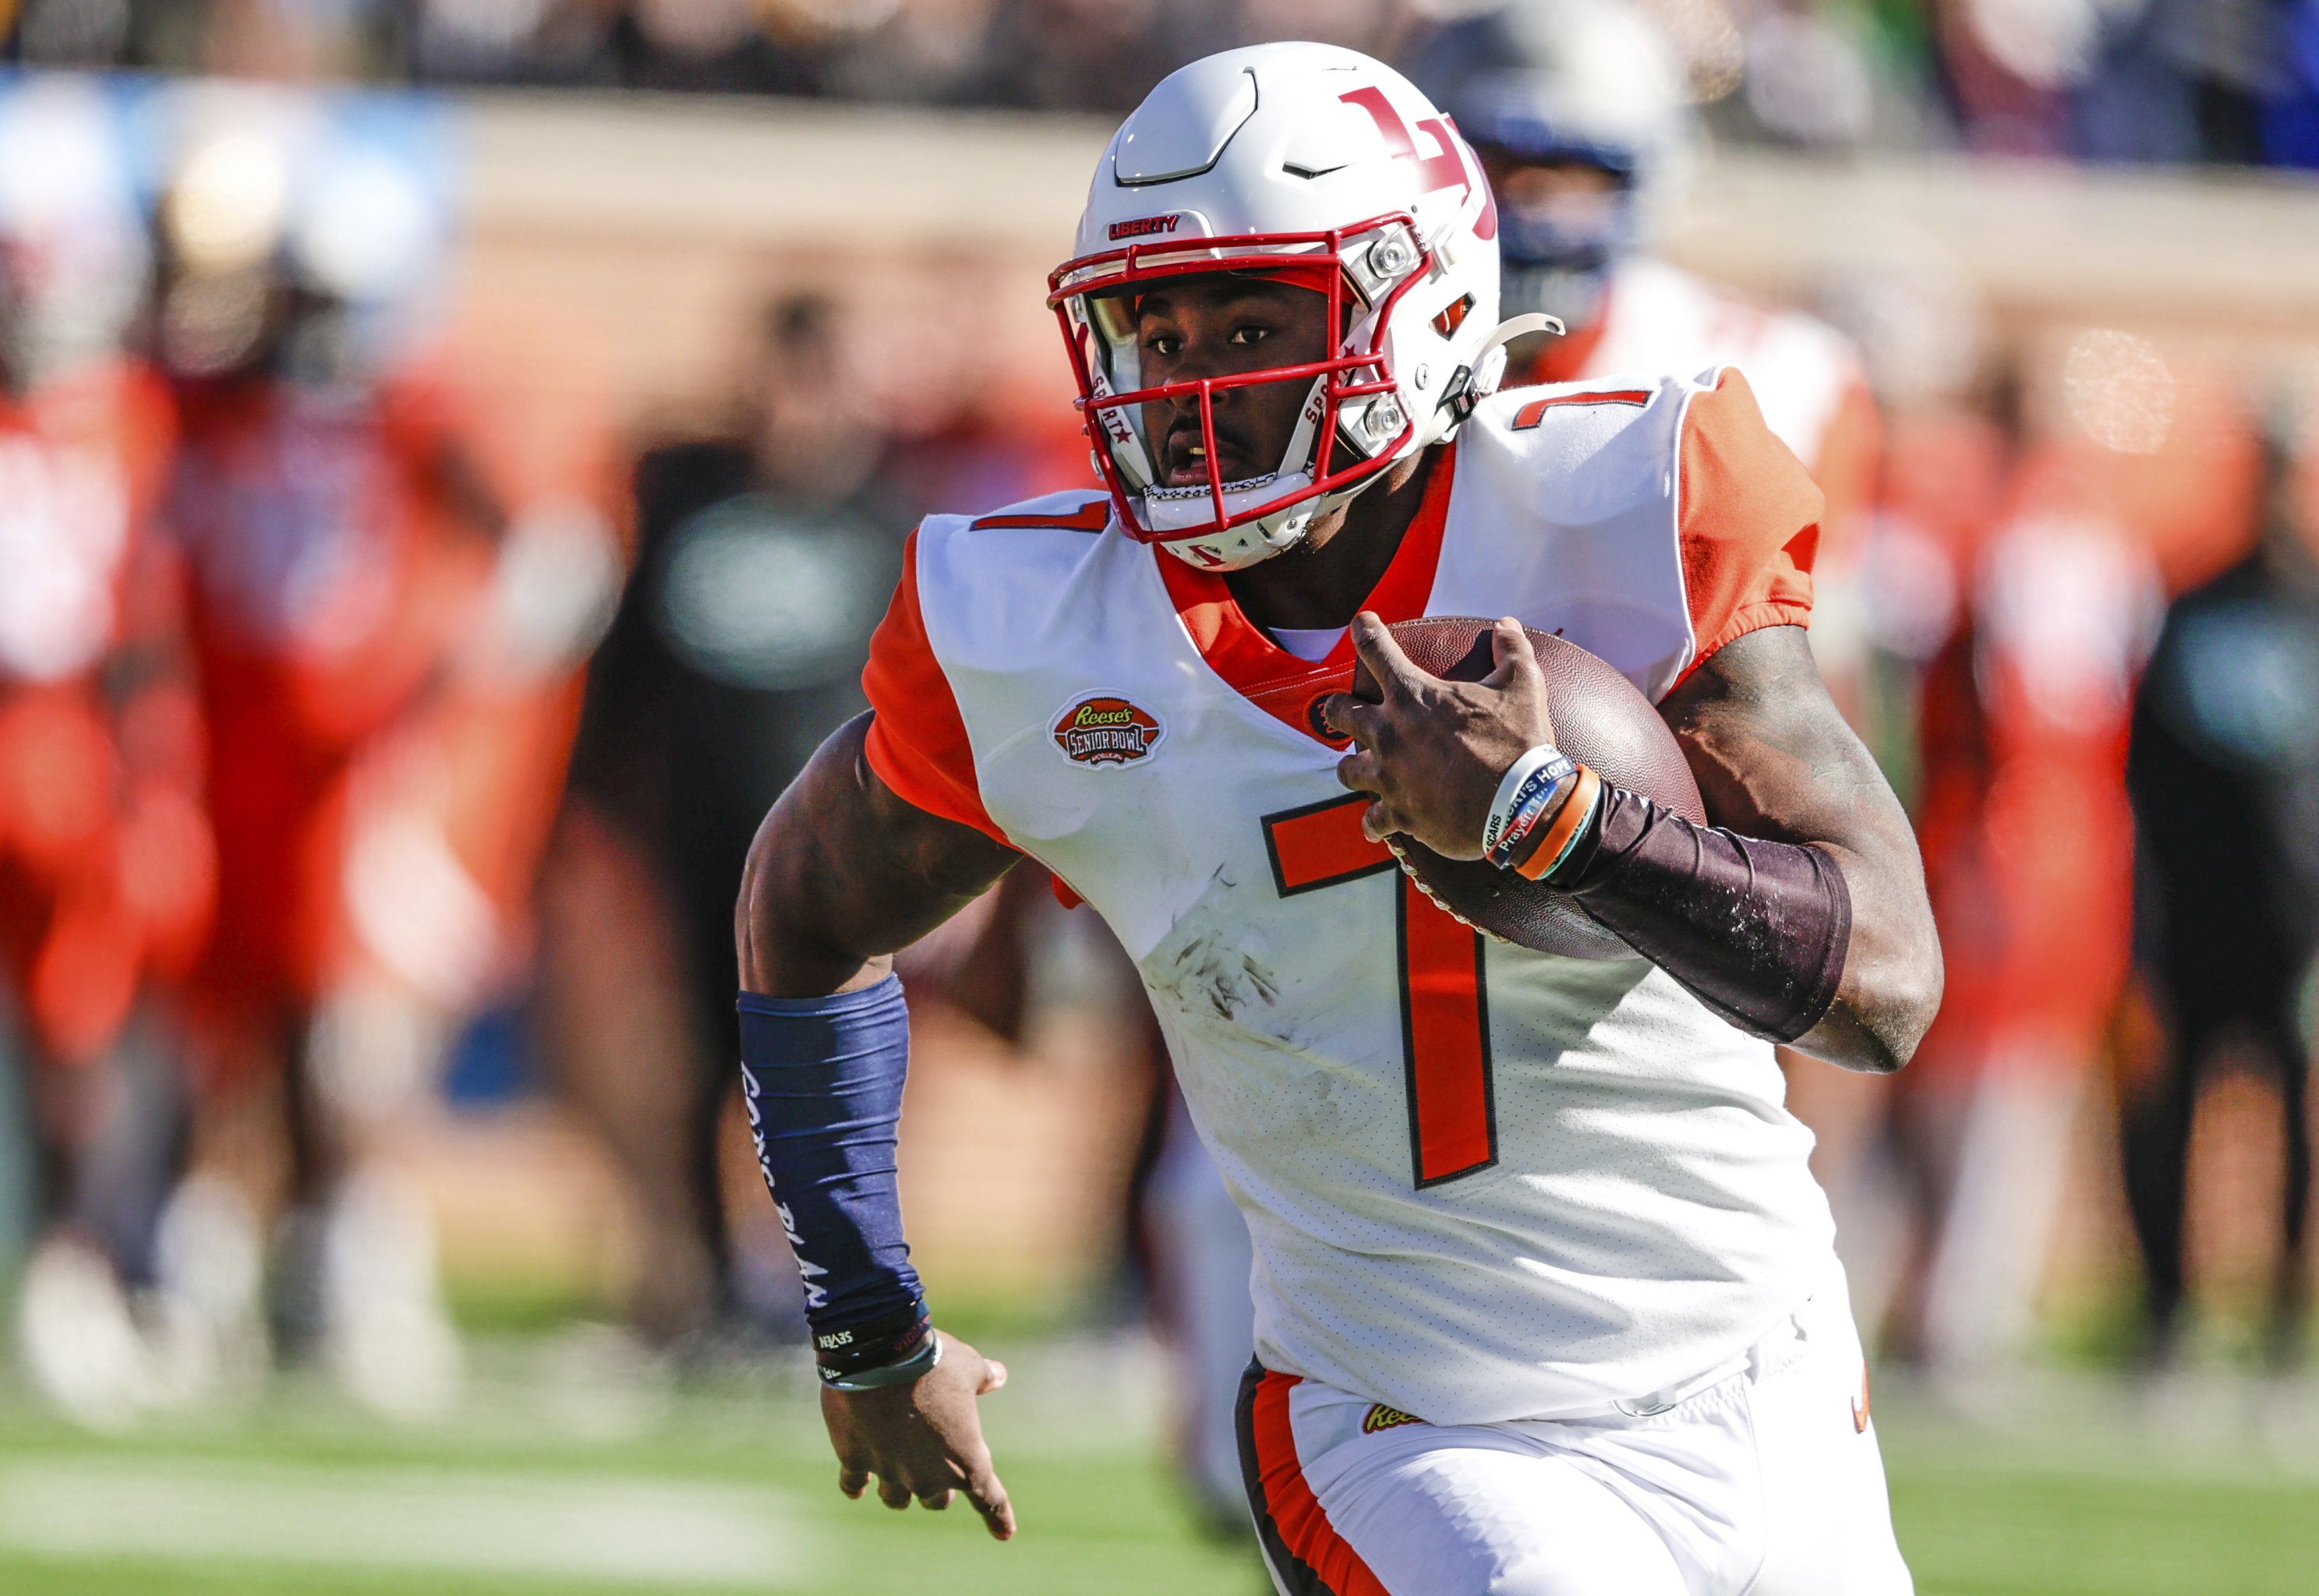 Senior Bowl 2022: Results and Prospects Who Boosted Draft Stock at